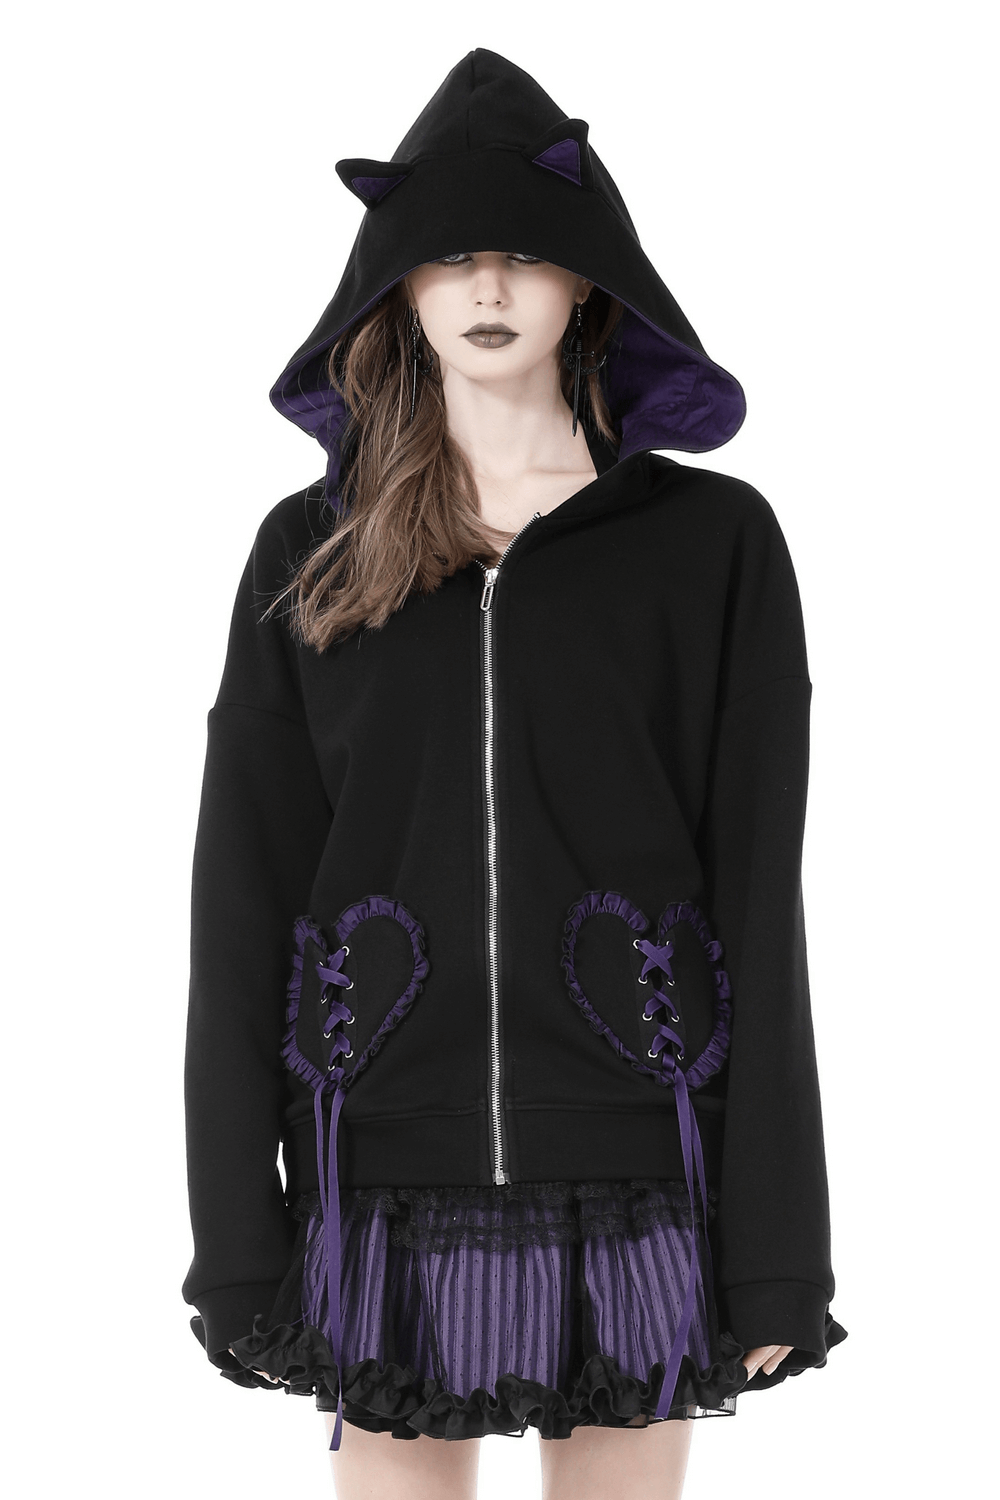 Black Bat Wing Cat Ear Hoodie with Lace-Up Detail